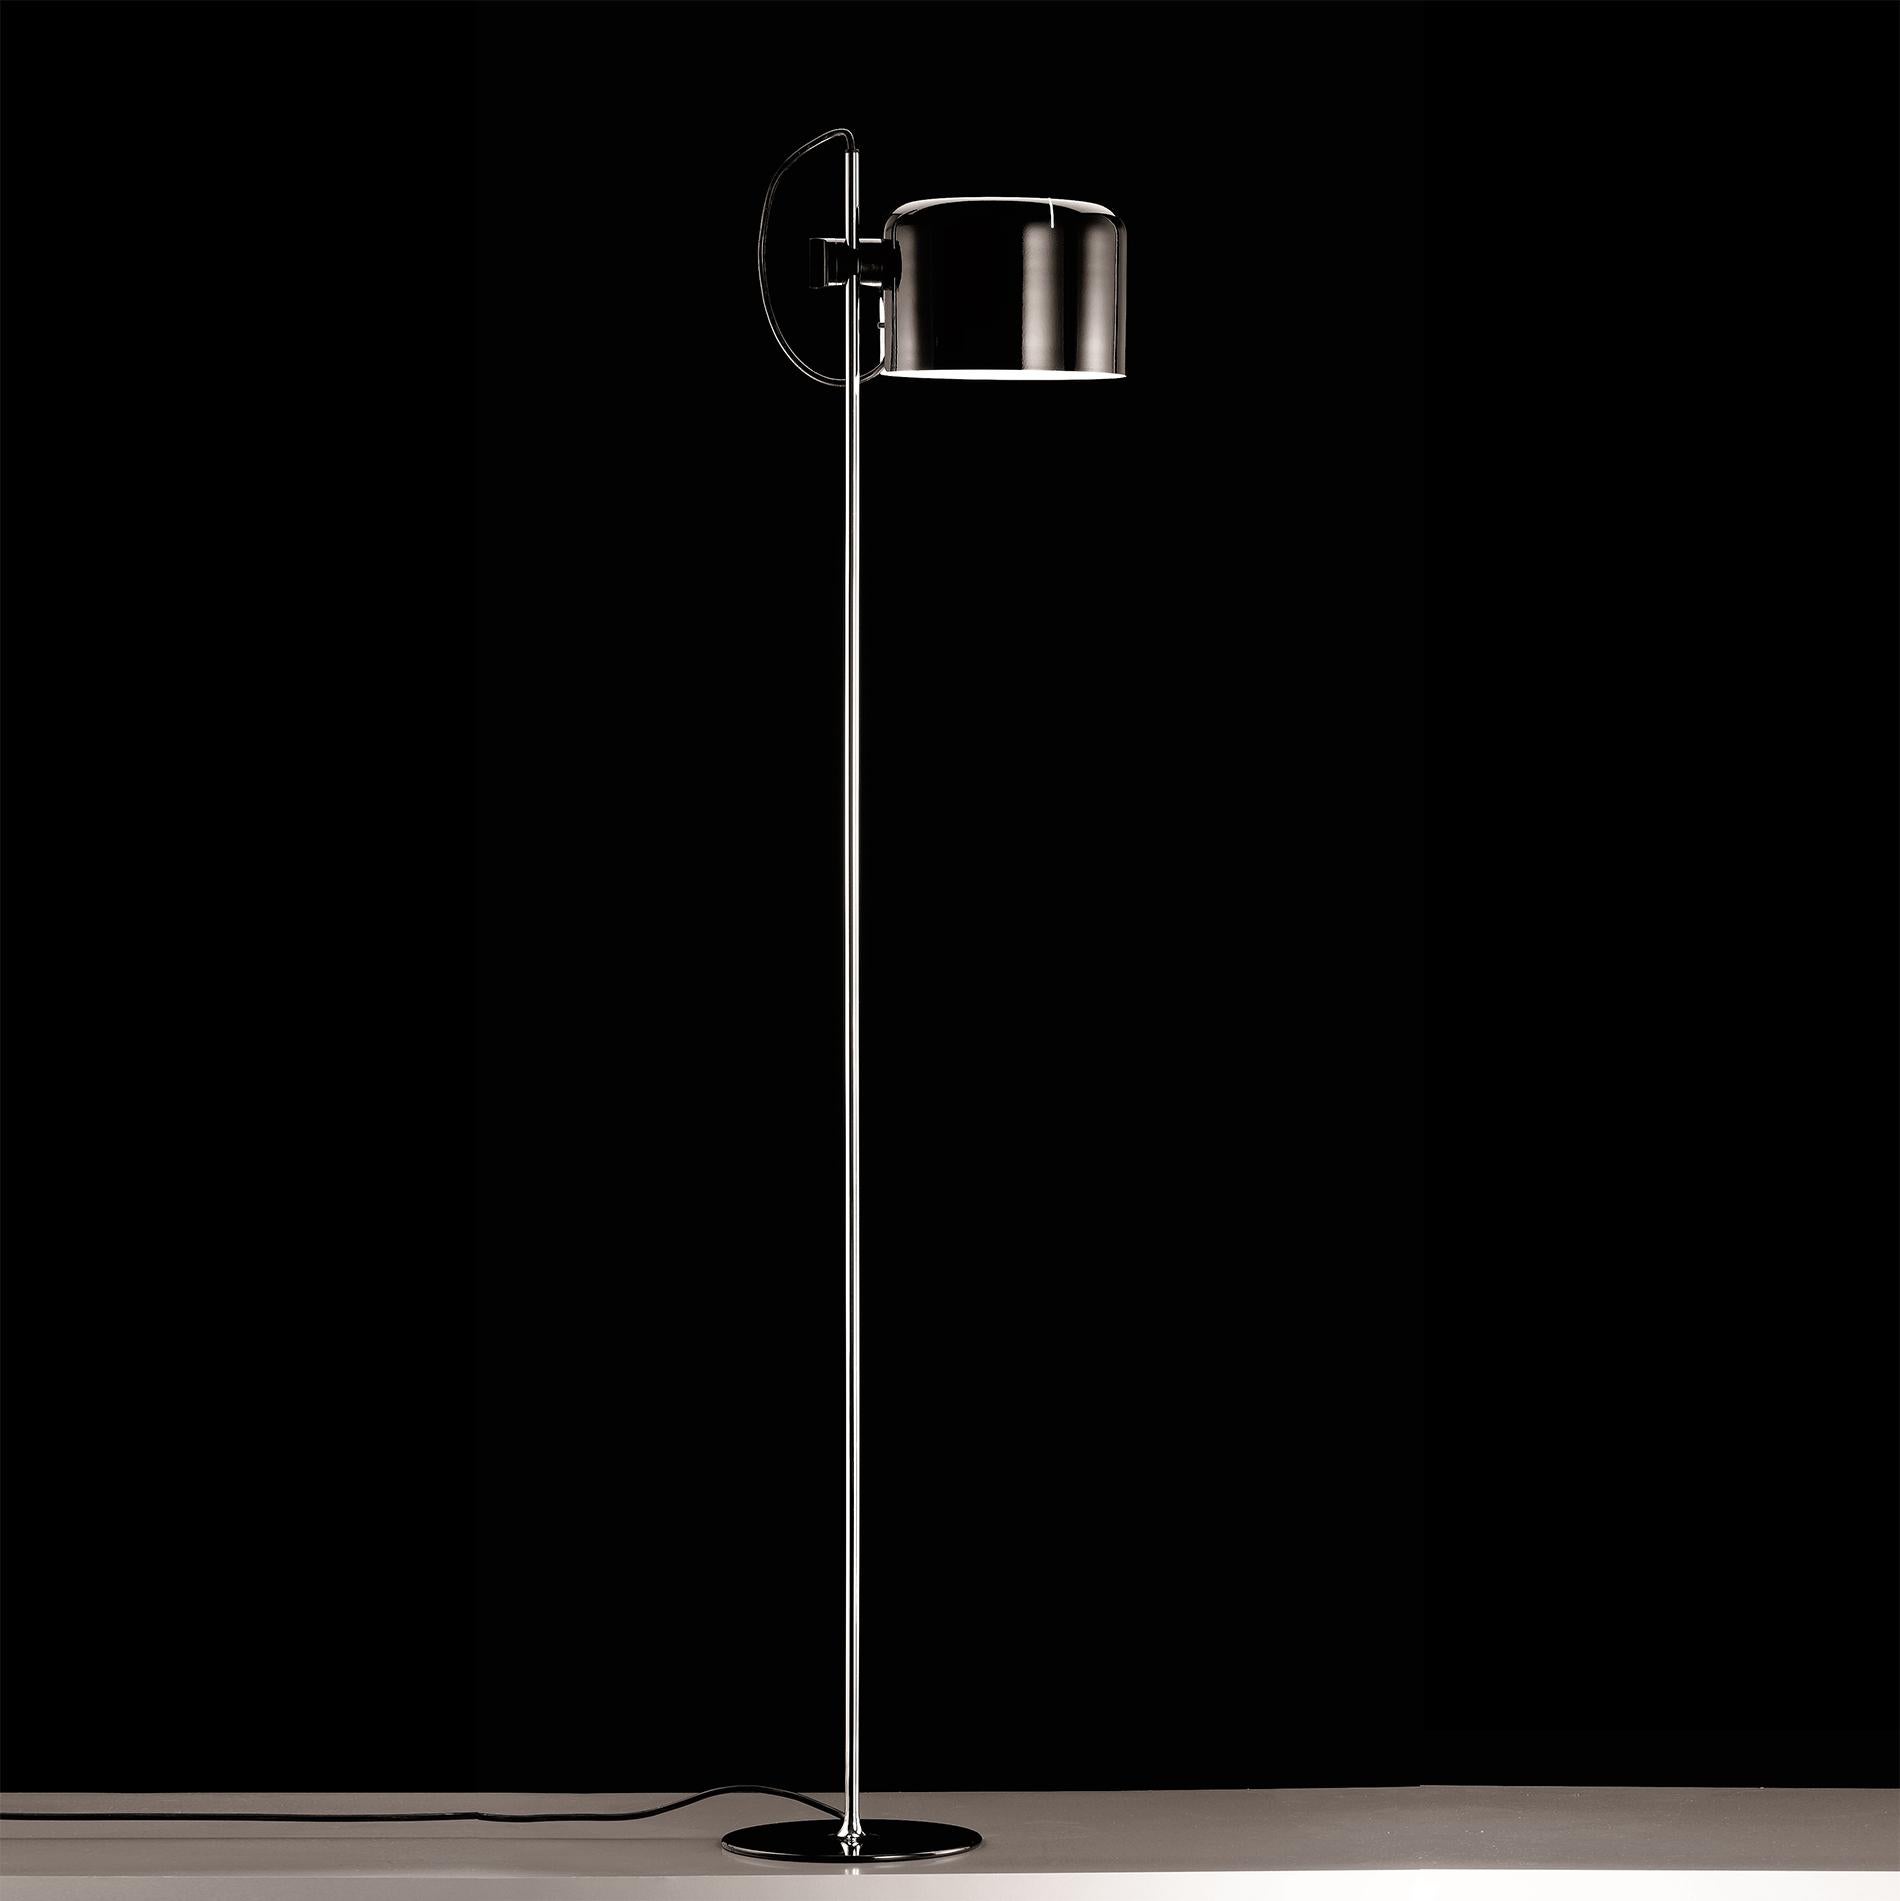 This stunning 'Coupé' floor lamp was designed by the legendary Joe Colombo in 1967 and is manufactured by Oluce, the oldest Italian design company in the lighting sector. The lamp has a lacquered metal base, a chromium-plated stem, and an adjustable